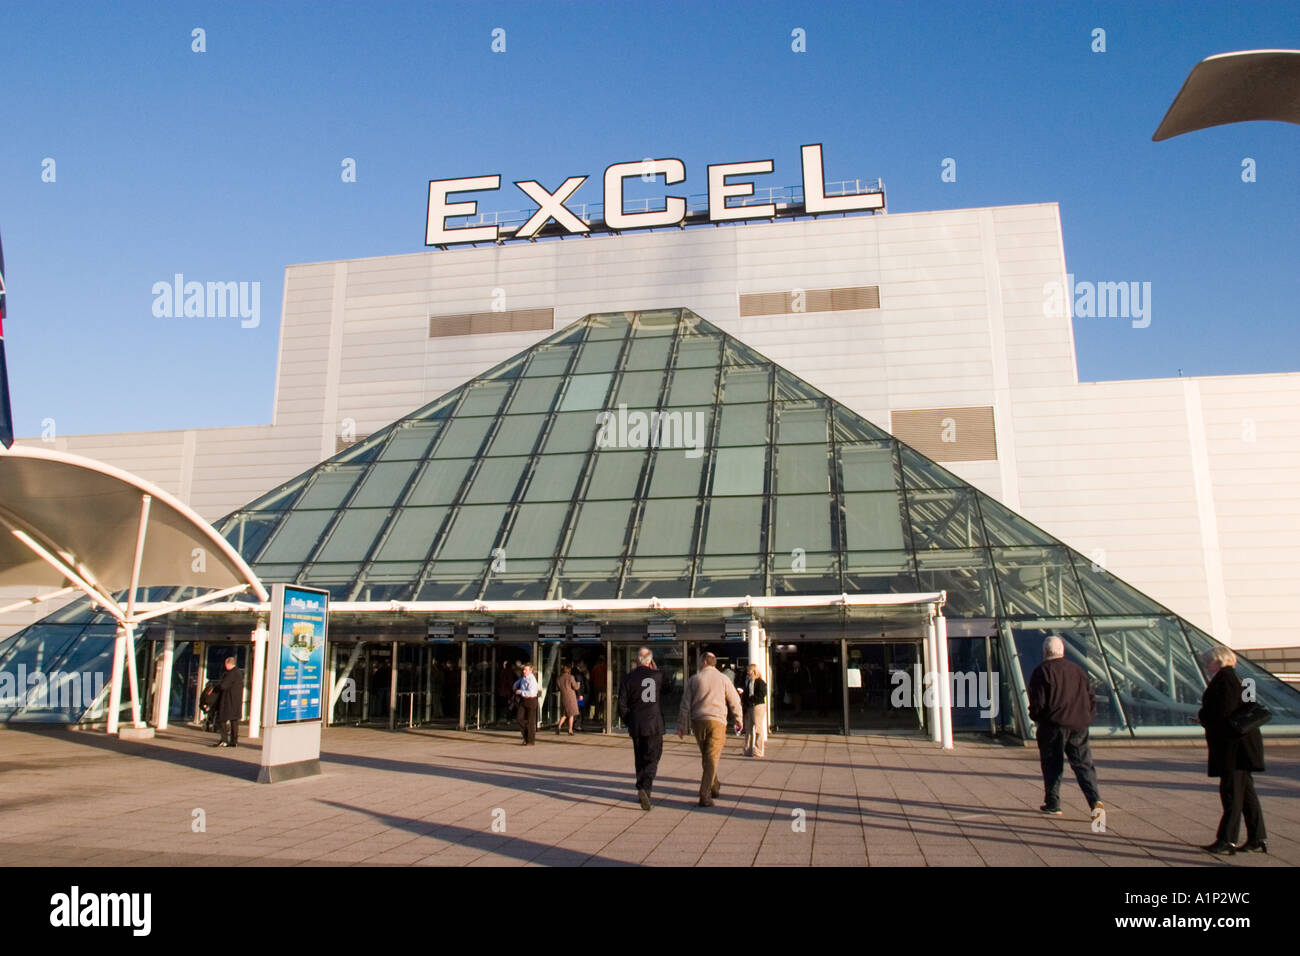 Excel London the International exhibition and conference centre in  Docklands, East London GB UK Stock Photo - Alamy